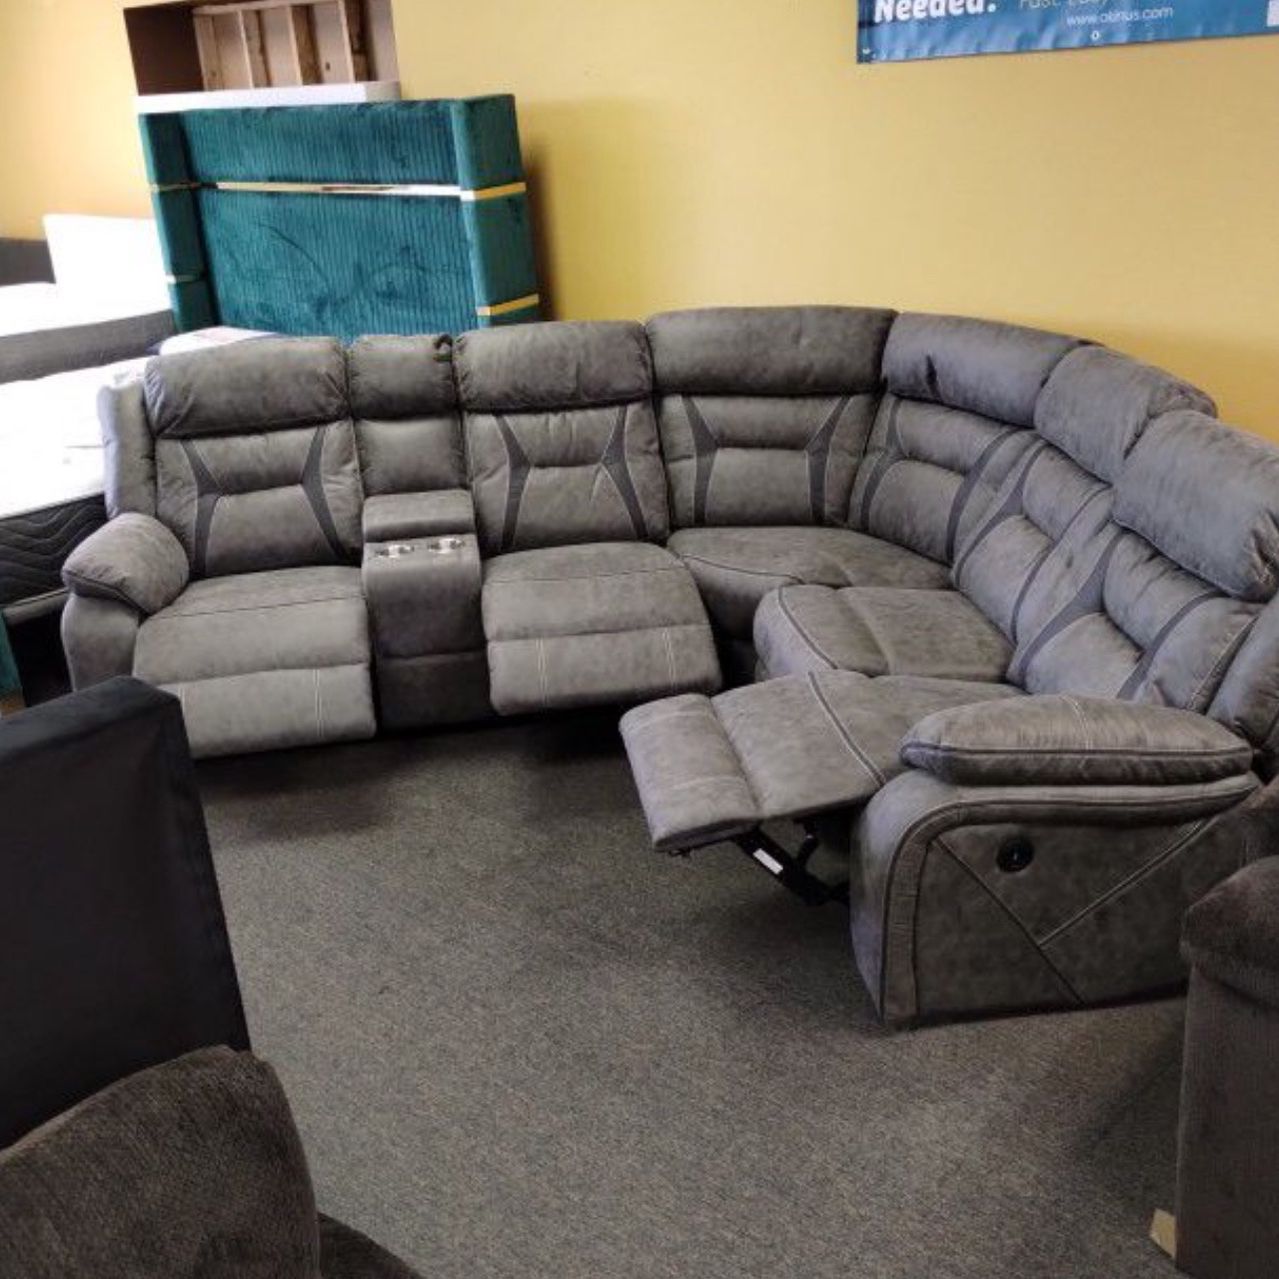 New liberty, gray power reclining sectional with power outlet, including free delivery